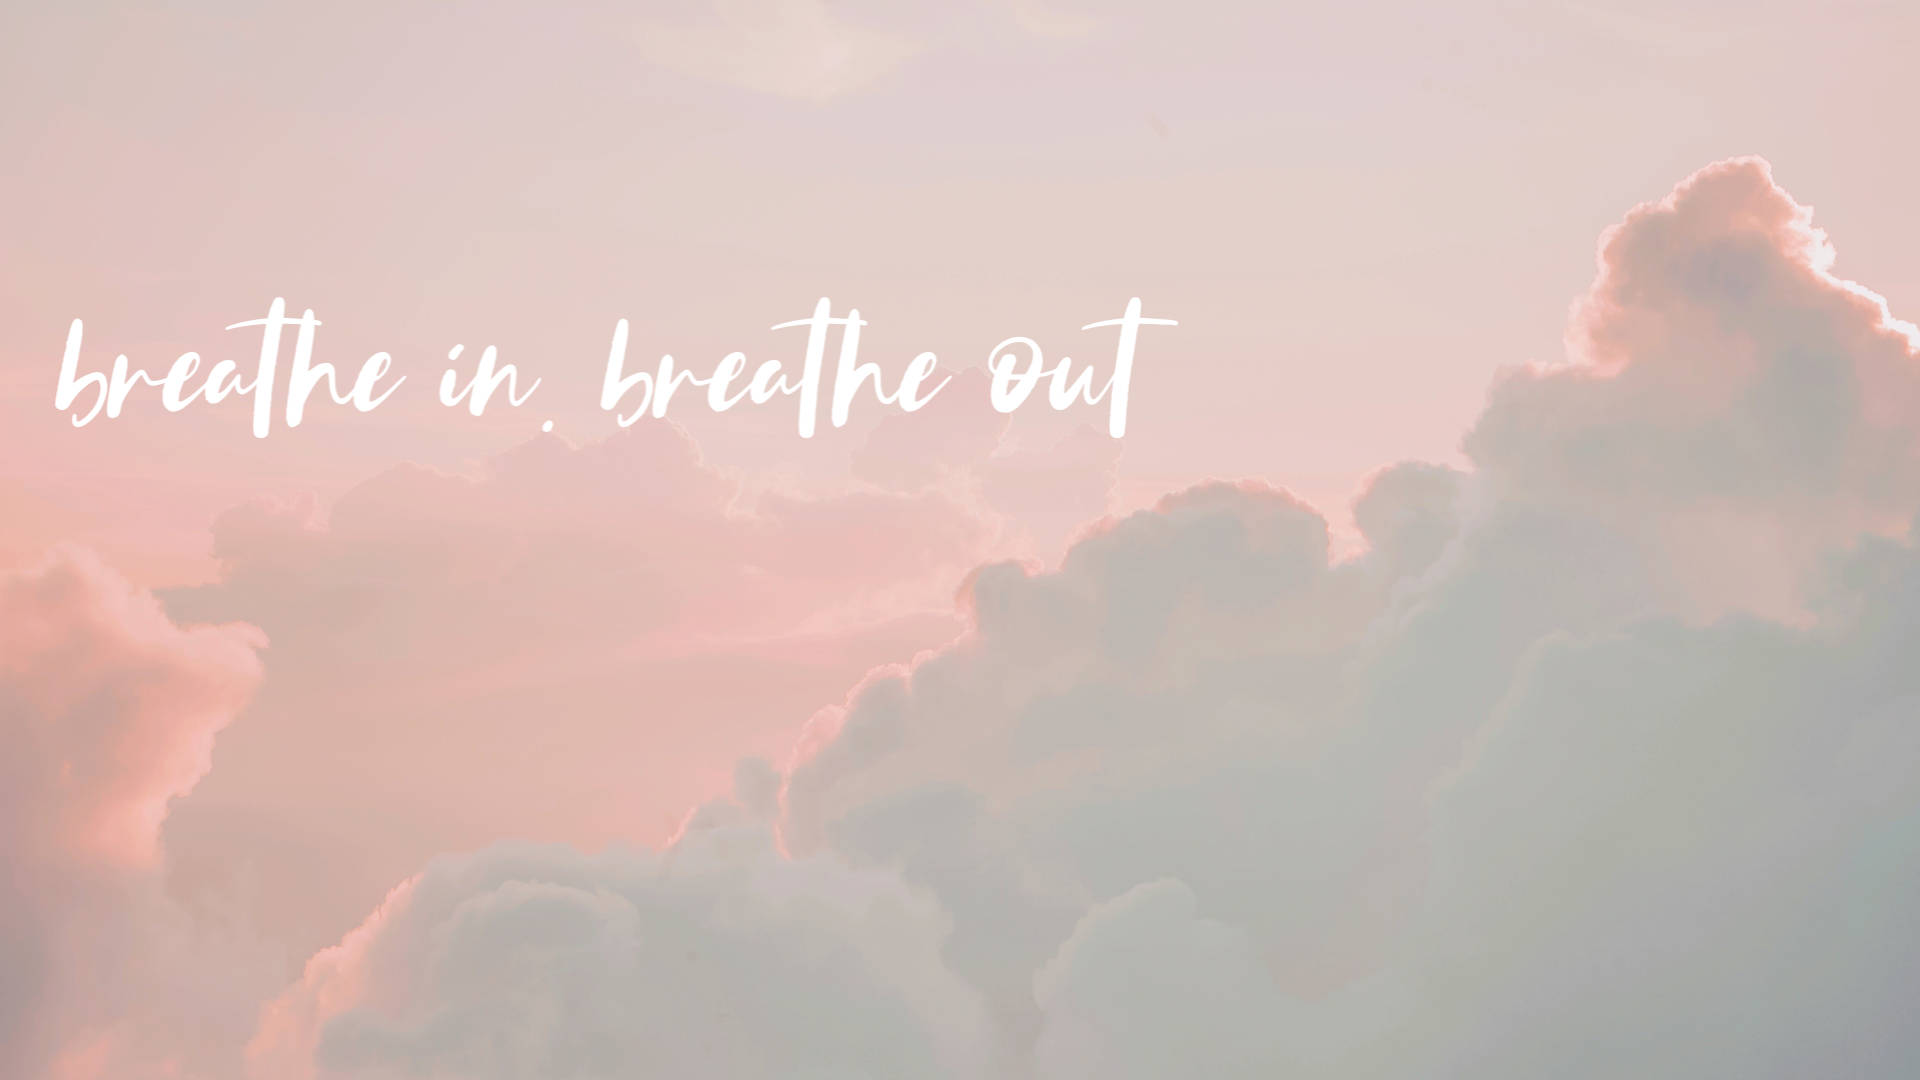 Breathe In Breathe Out Pastel Aesthetic Tumblr Laptop Picture